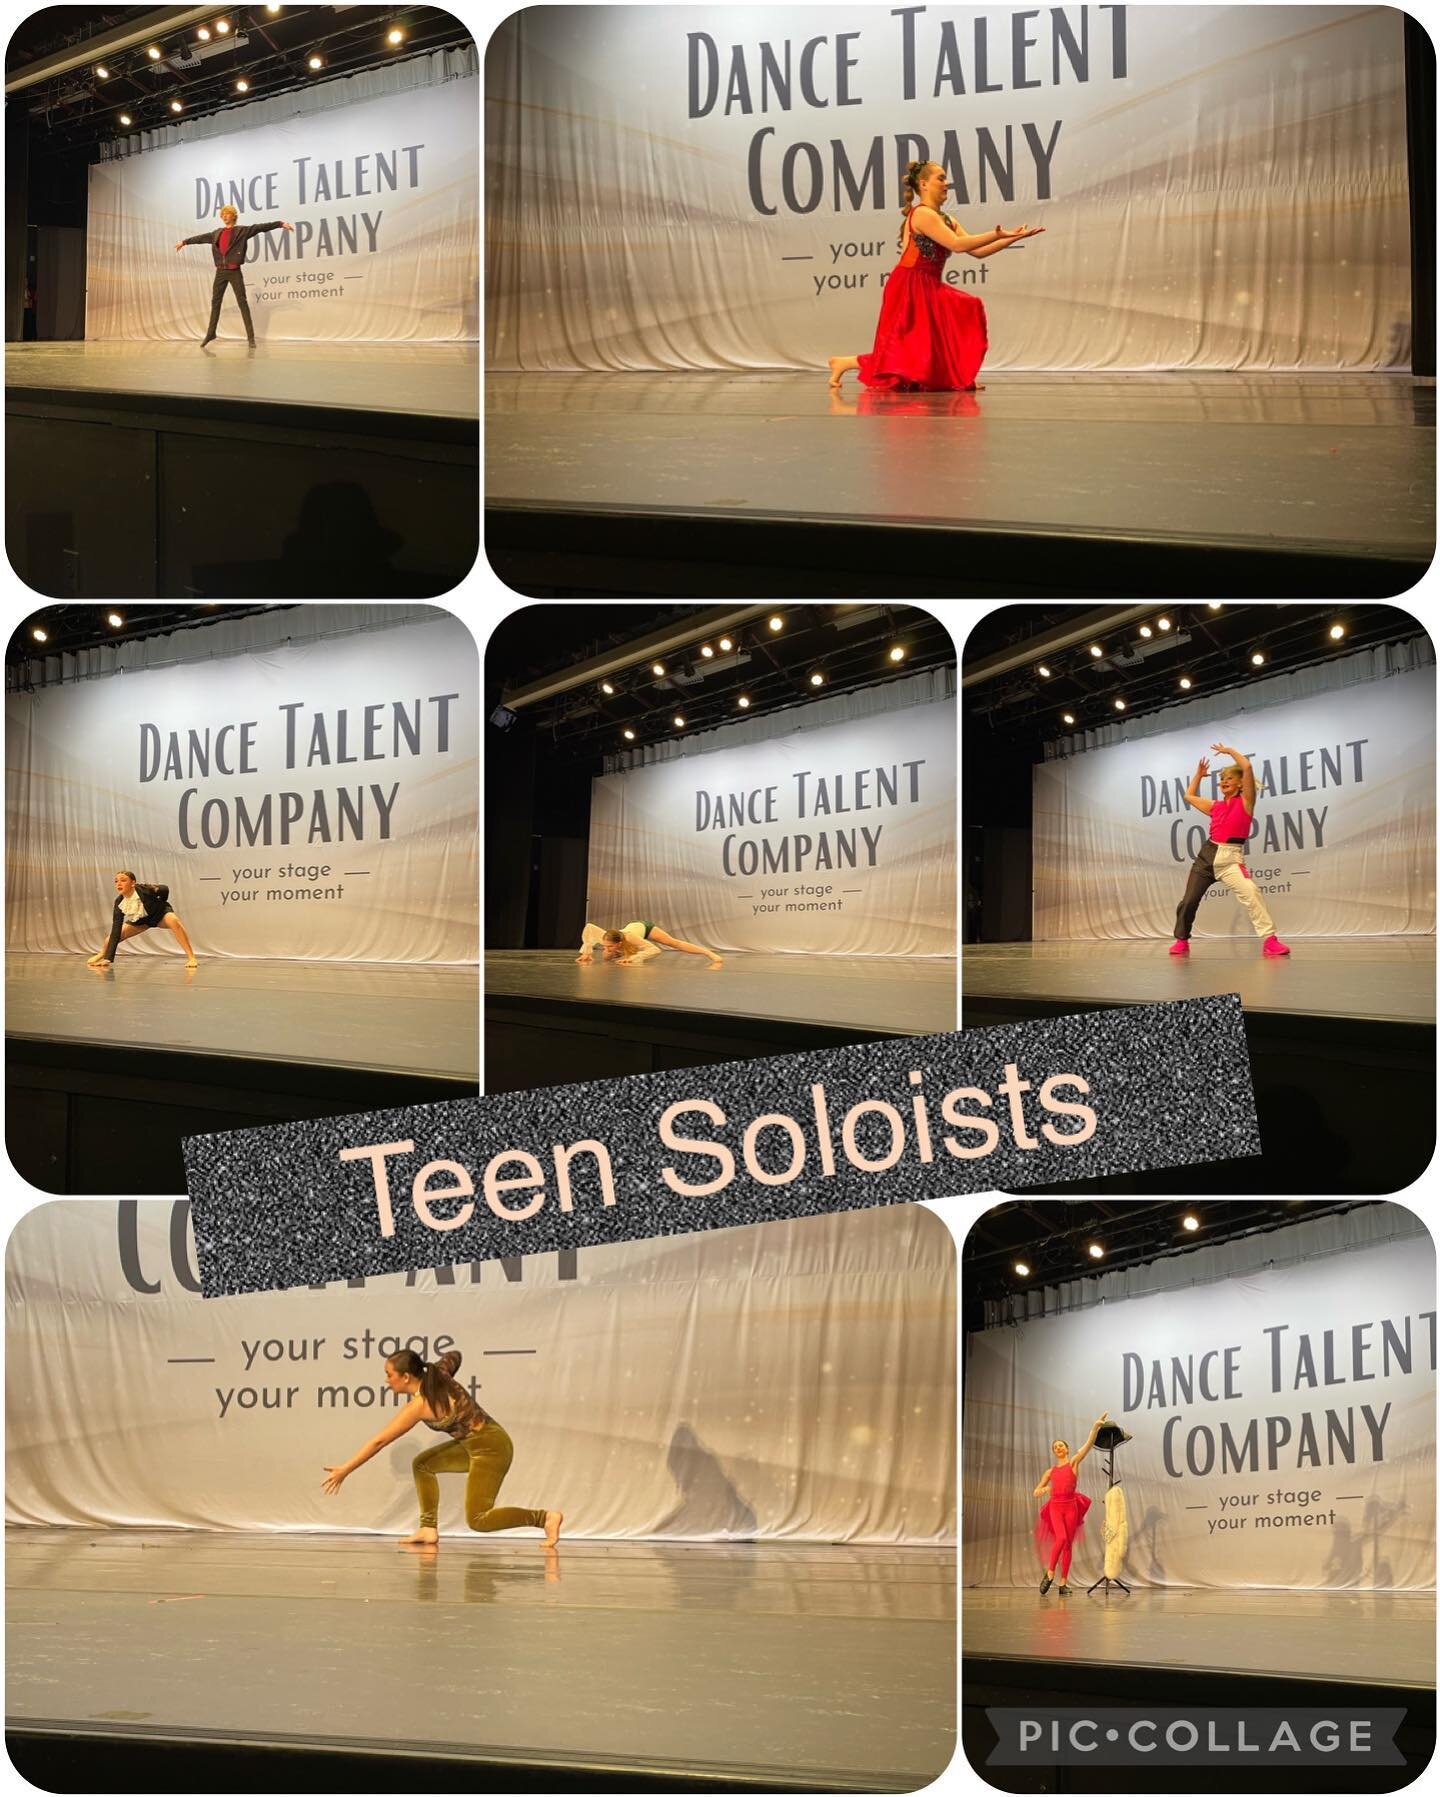 GOOOOOOD MORNING from Billings! These teen soloists are here for it 💪🏻 
.
.
.
Do you see some familiar dancers? 🤨

#dancetalent #dtcbillings